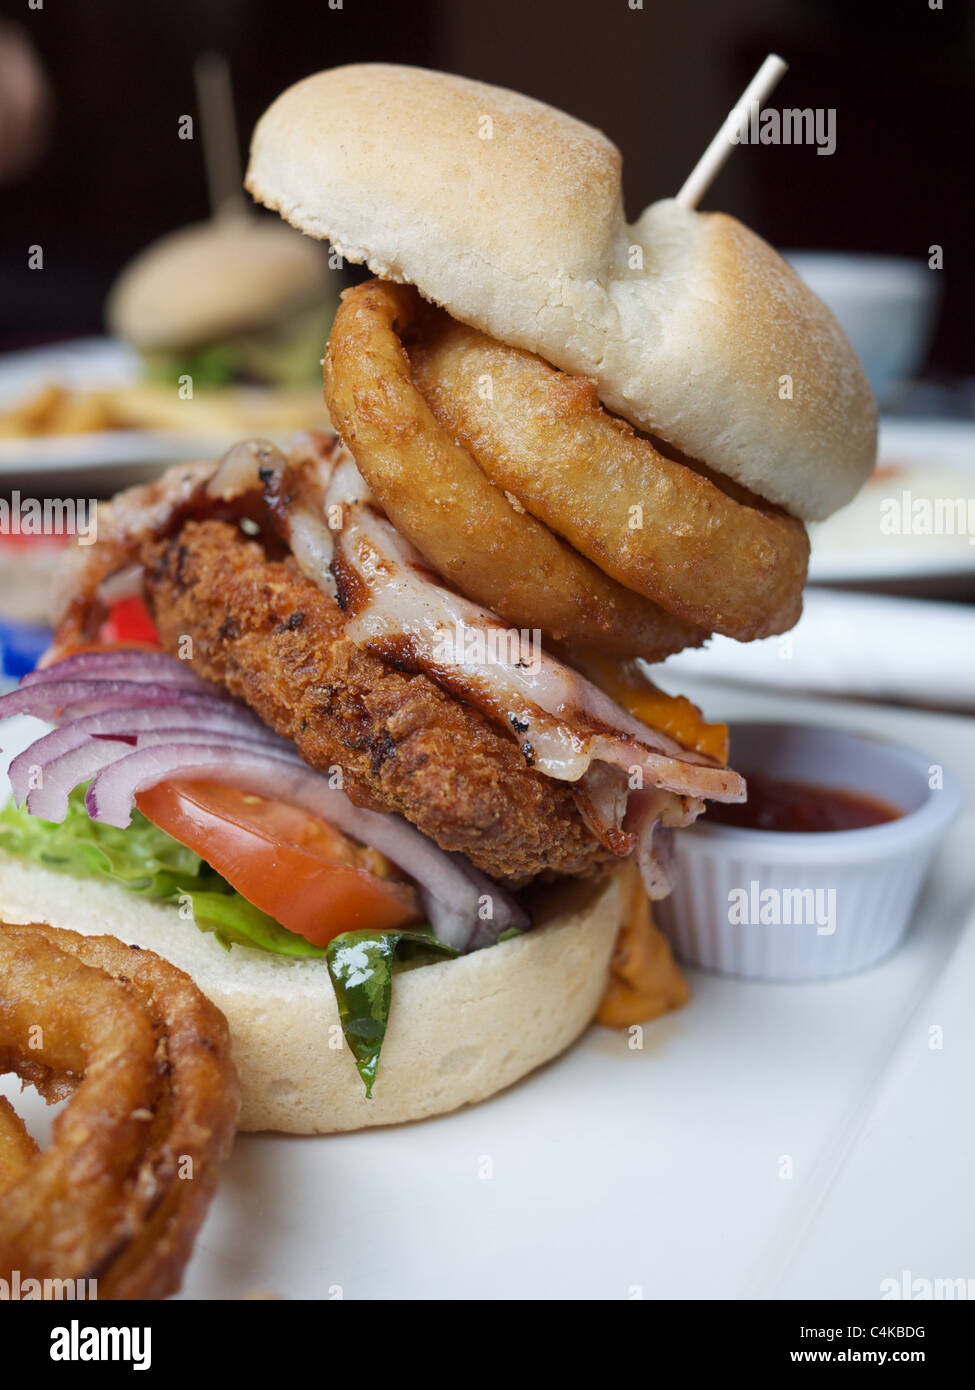 Gourmet Chicken Burger from weatherspoons pub Stock Photo - Alamy